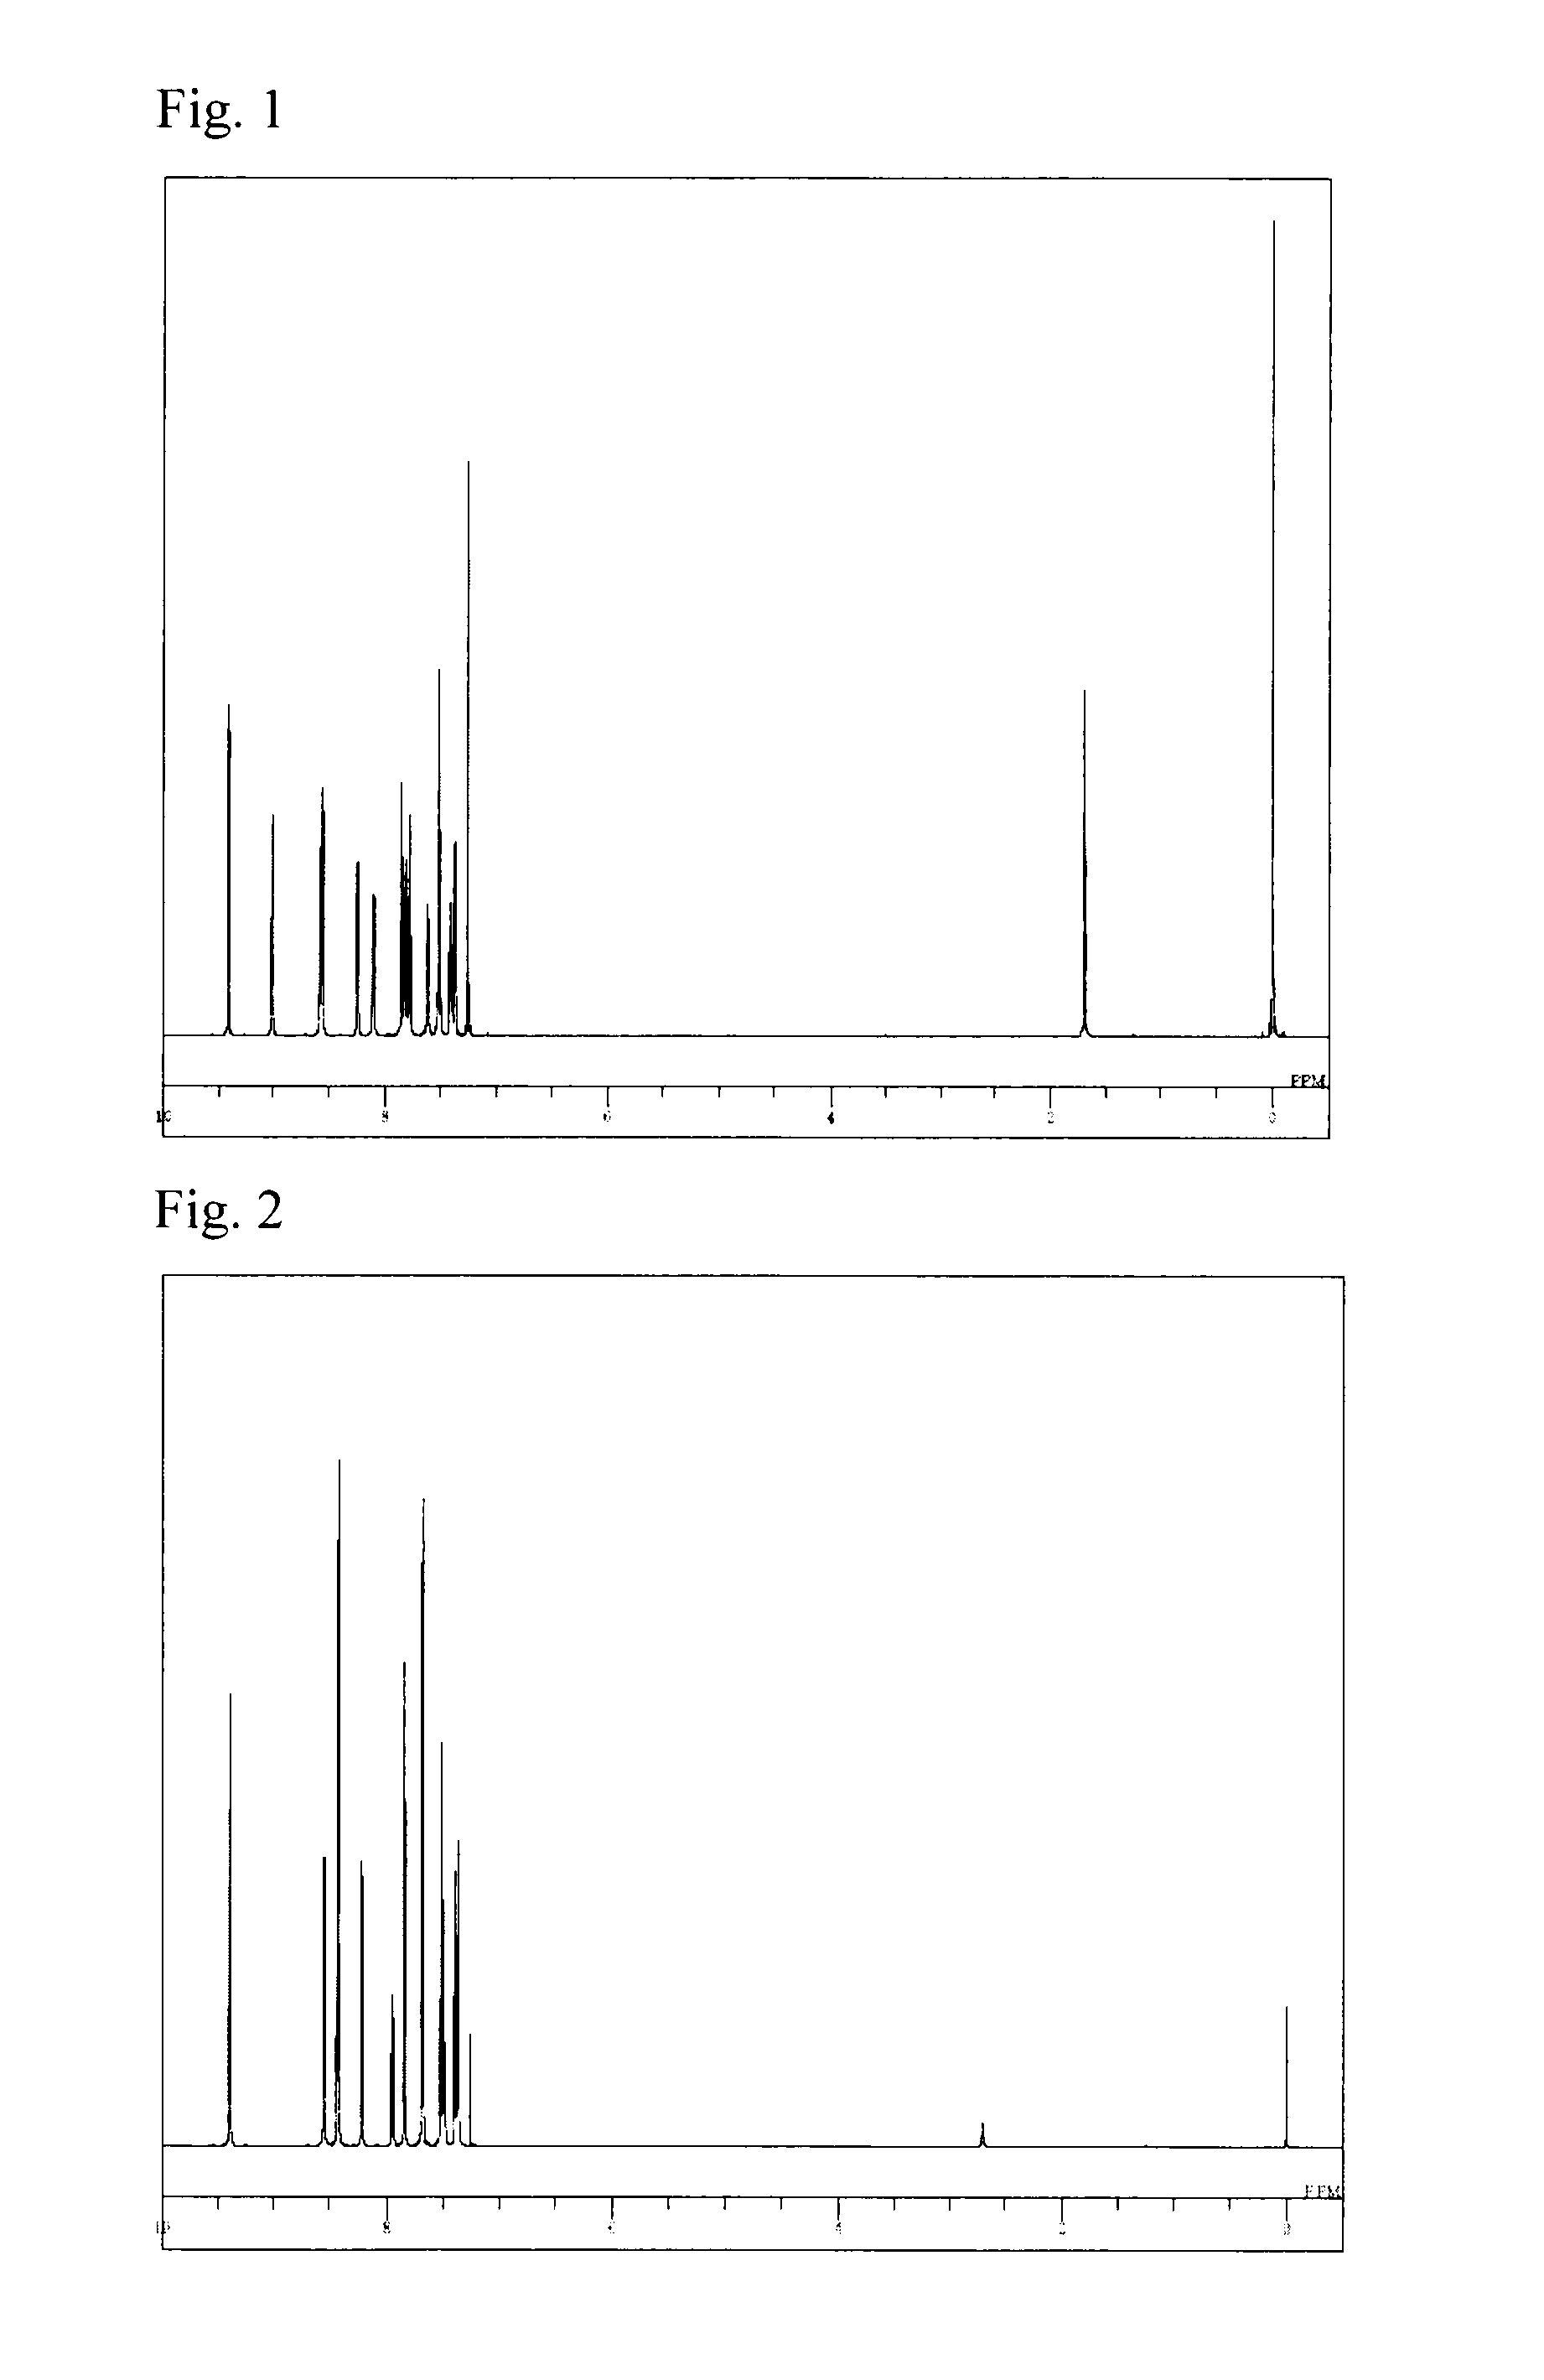 Compound having substituted pyridyl group and pyridoindole ring structure linked through phenylene group, and organic electroluminescent device